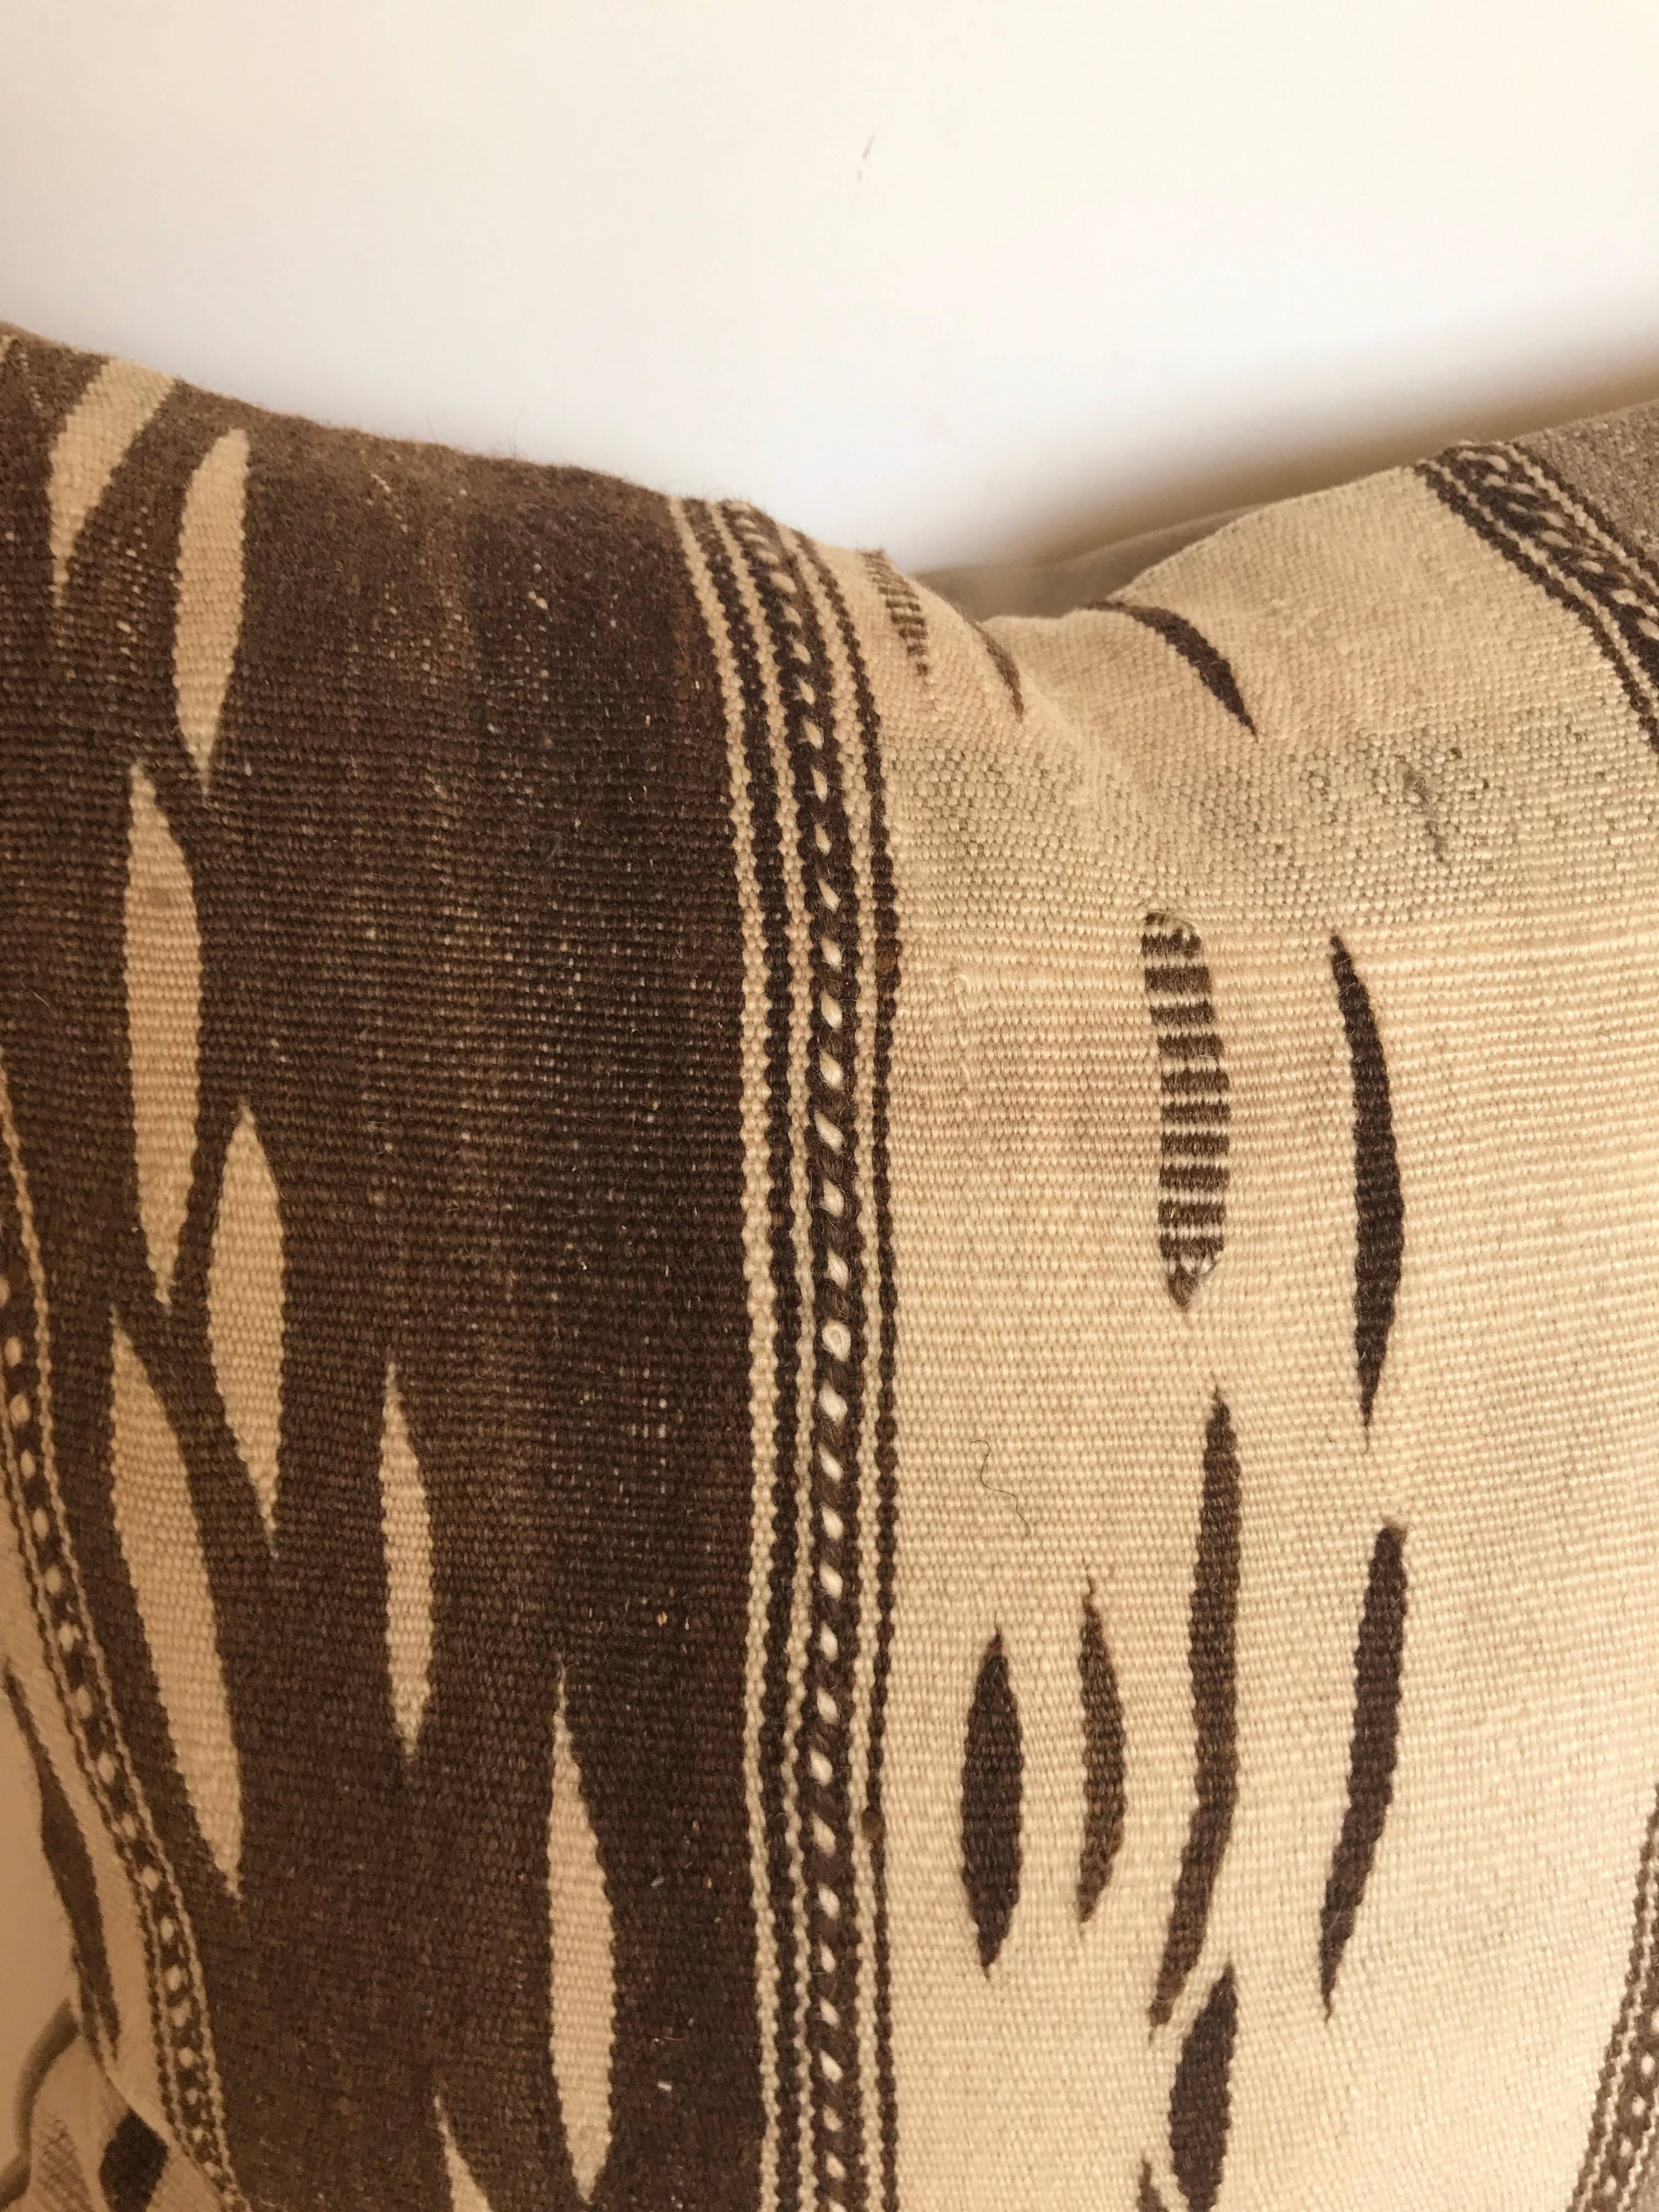 Hand-Knotted Custom Moroccan Pillow Cut from a Vintage Hand Loomed Wool Ourika Kilim Rug